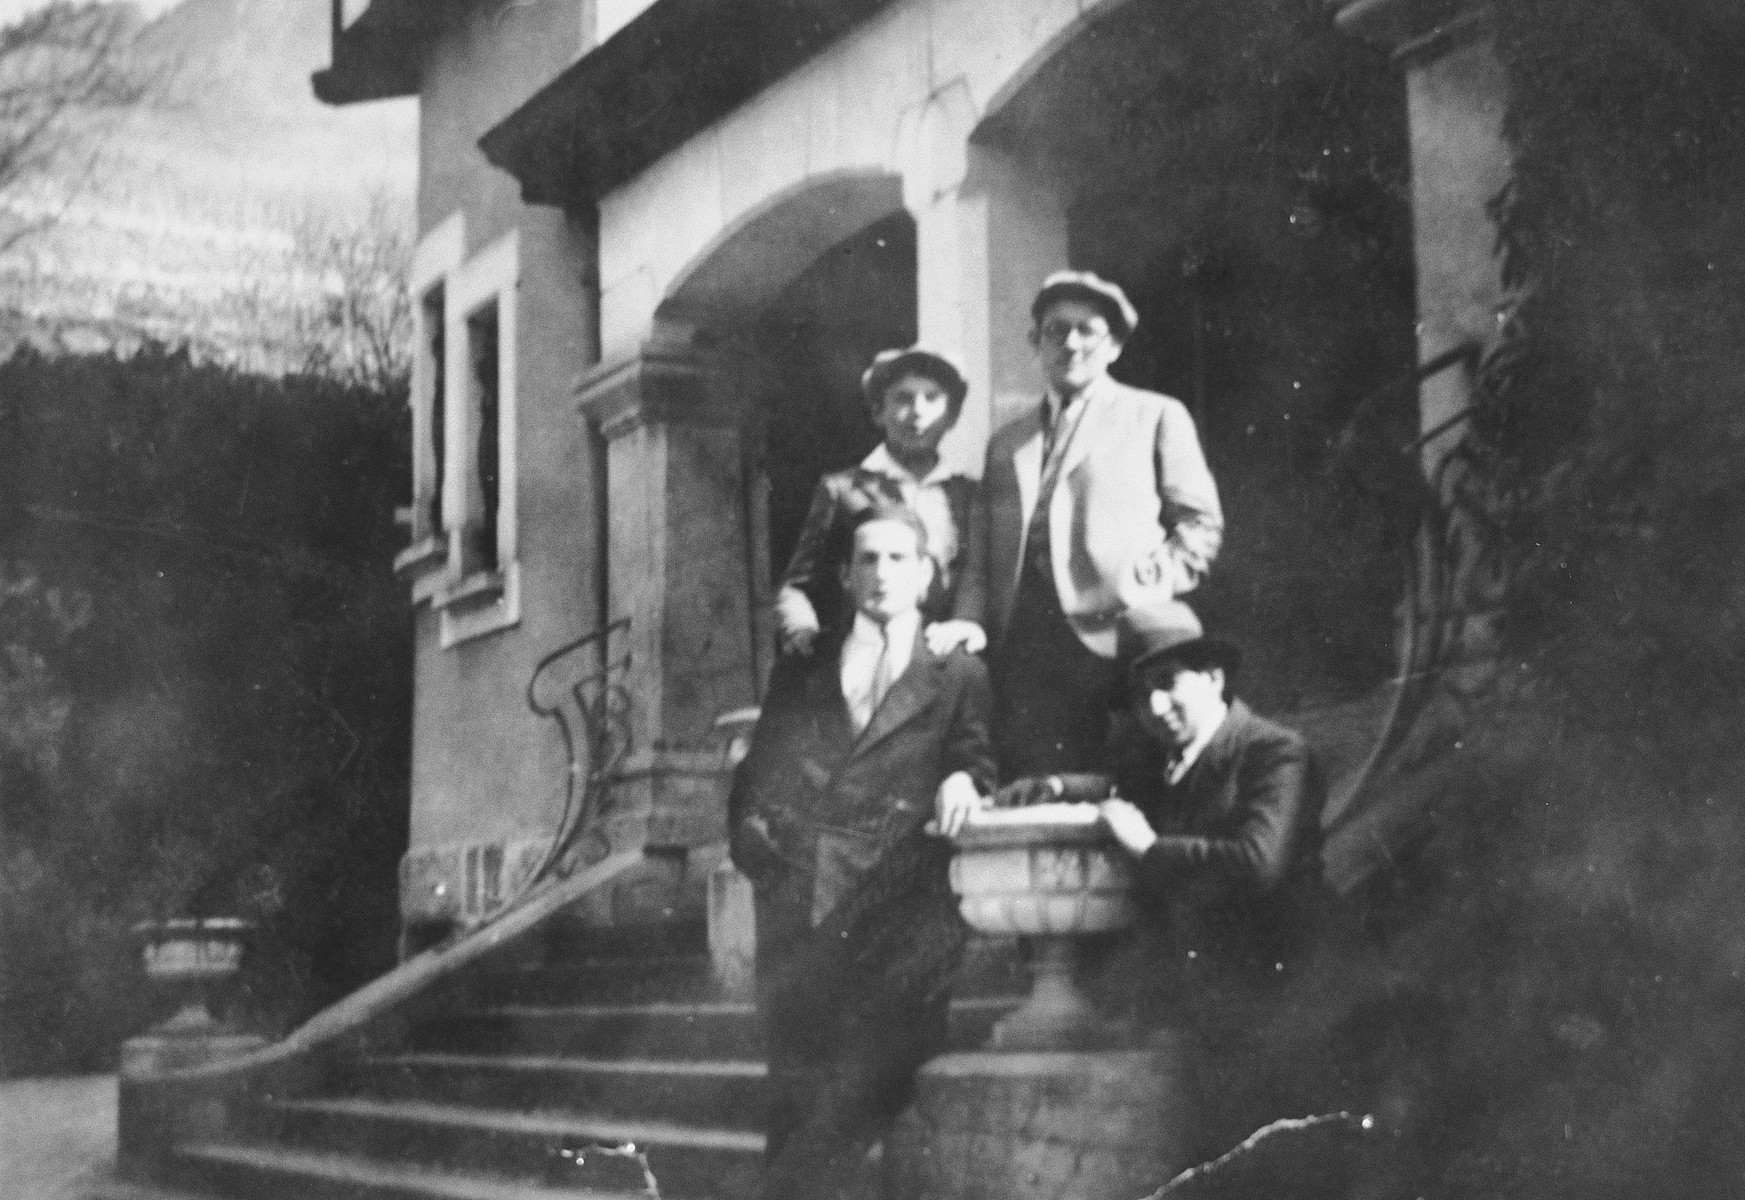 Four young men pose on the steps outside their yeshiva.